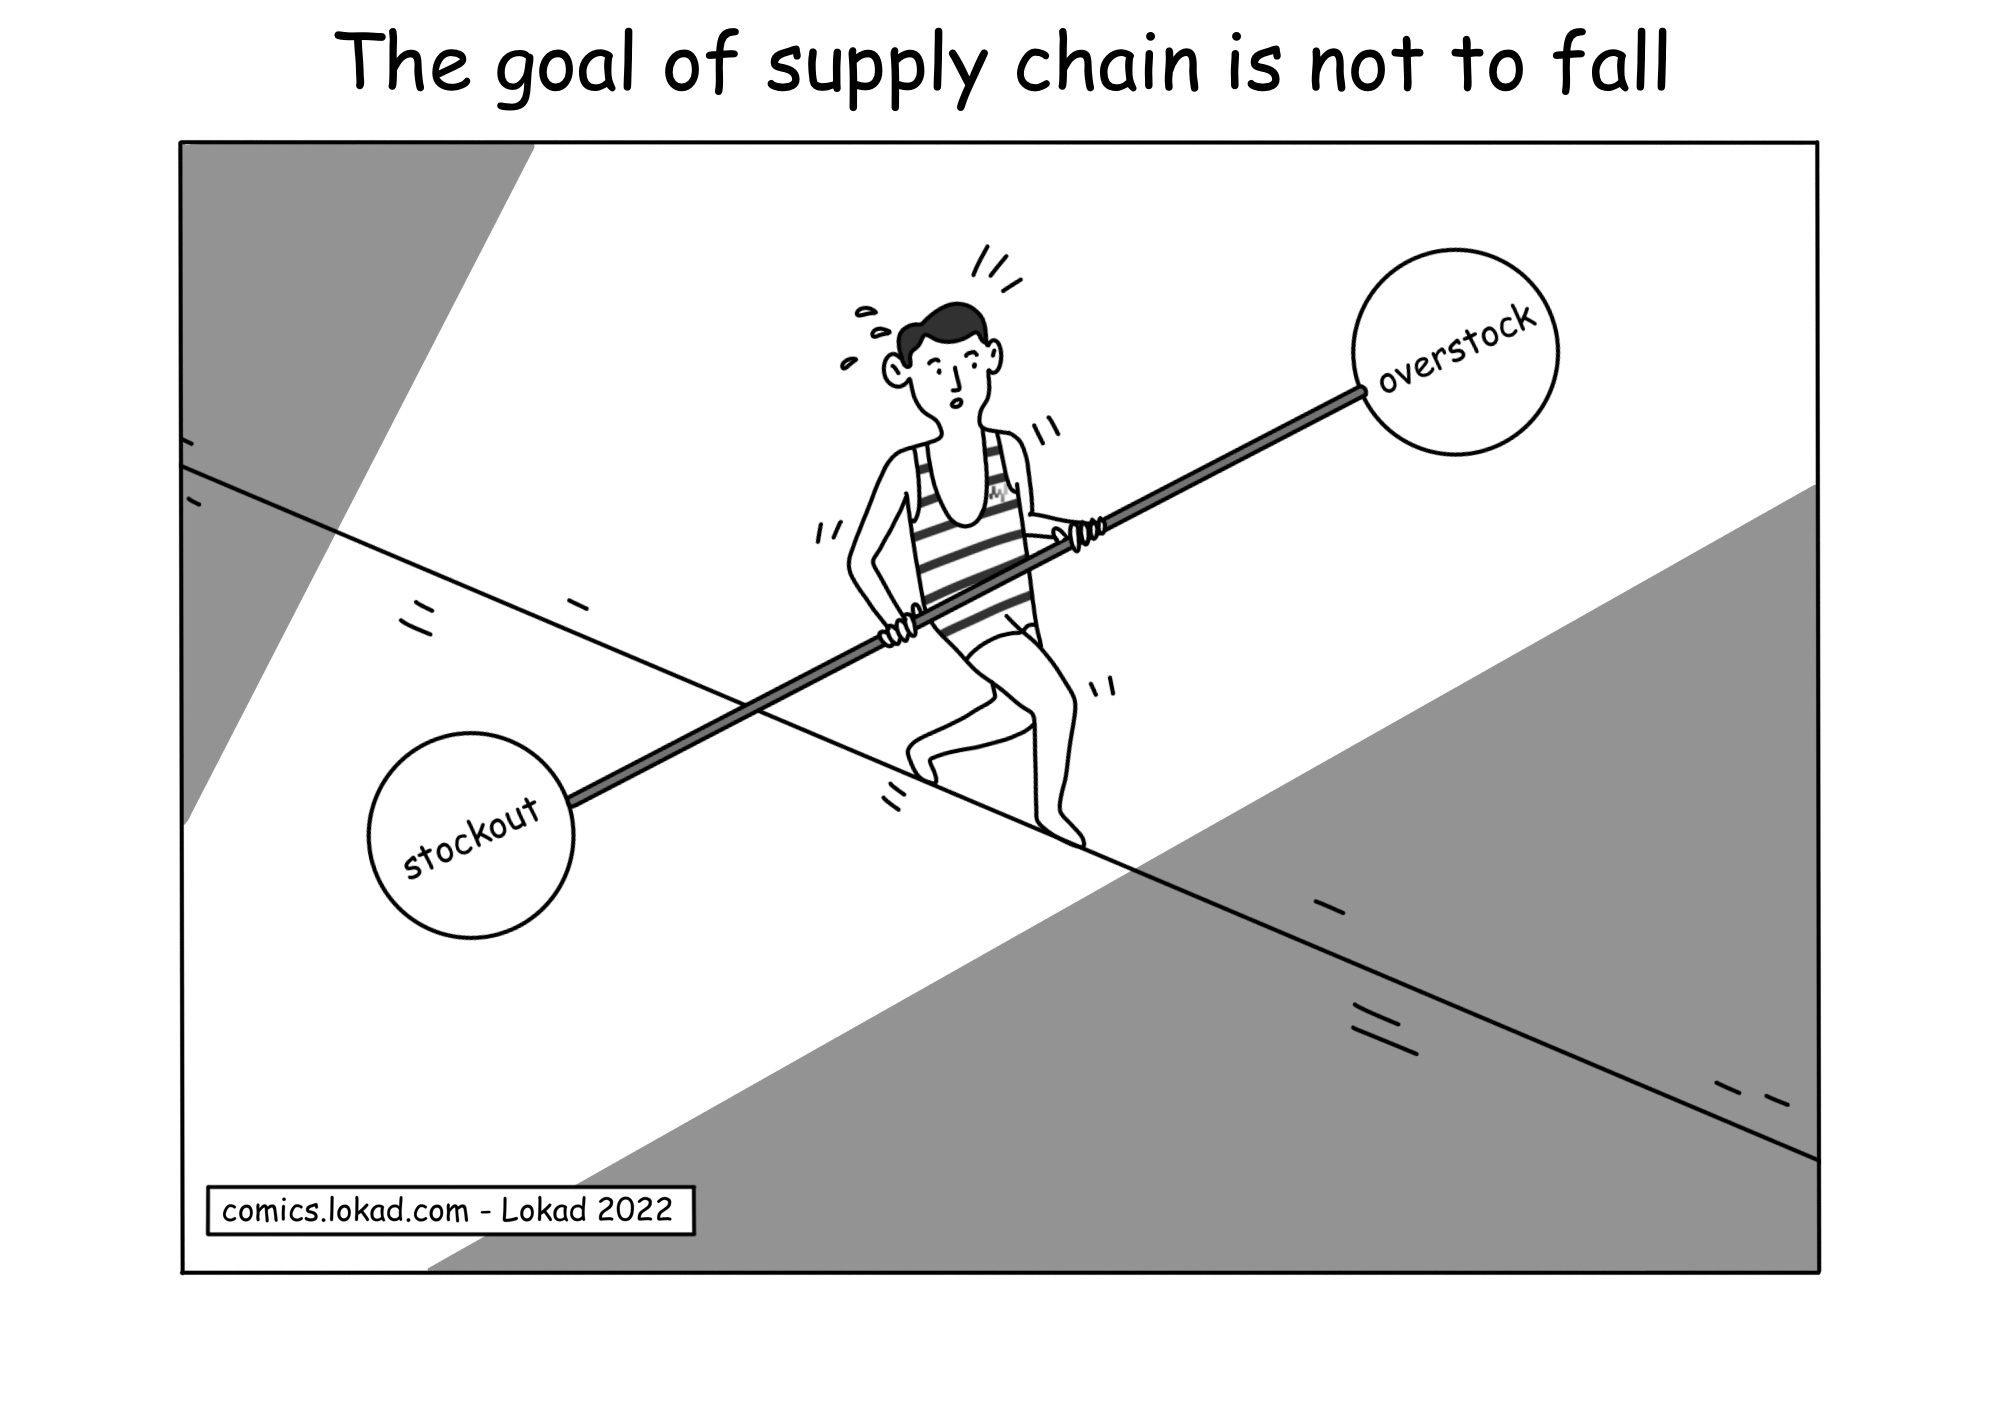 The goal of supply chain is not to fall